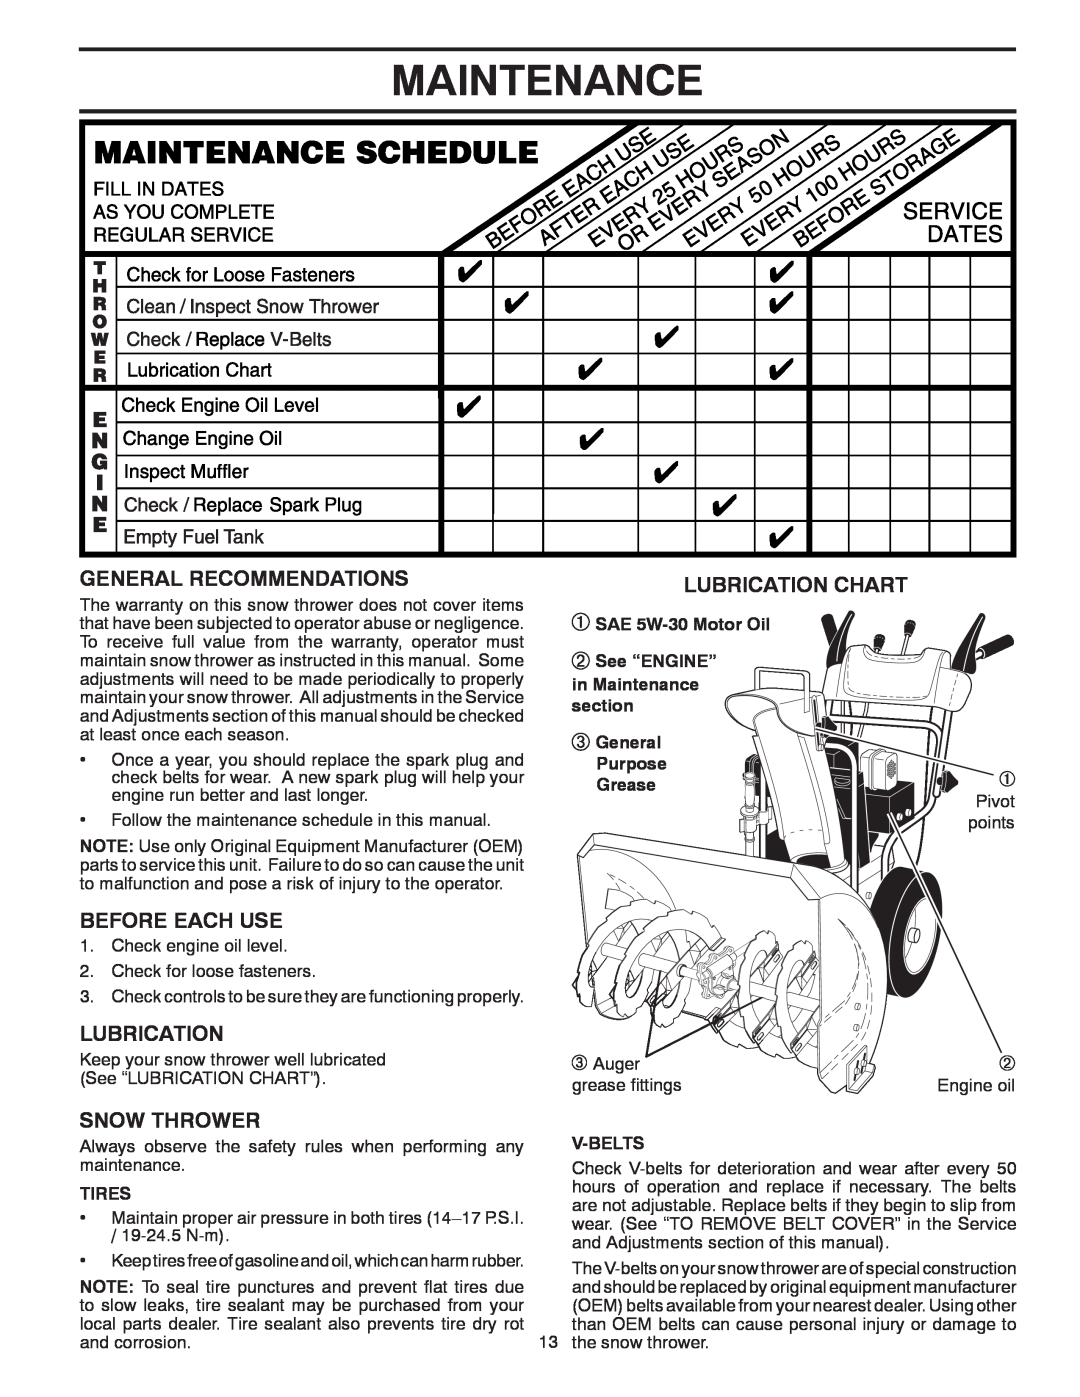 Poulan 418962 Maintenance, General Recommendations, Before Each Use, Lubrication Chart, Snow Thrower, Purpose Grease 